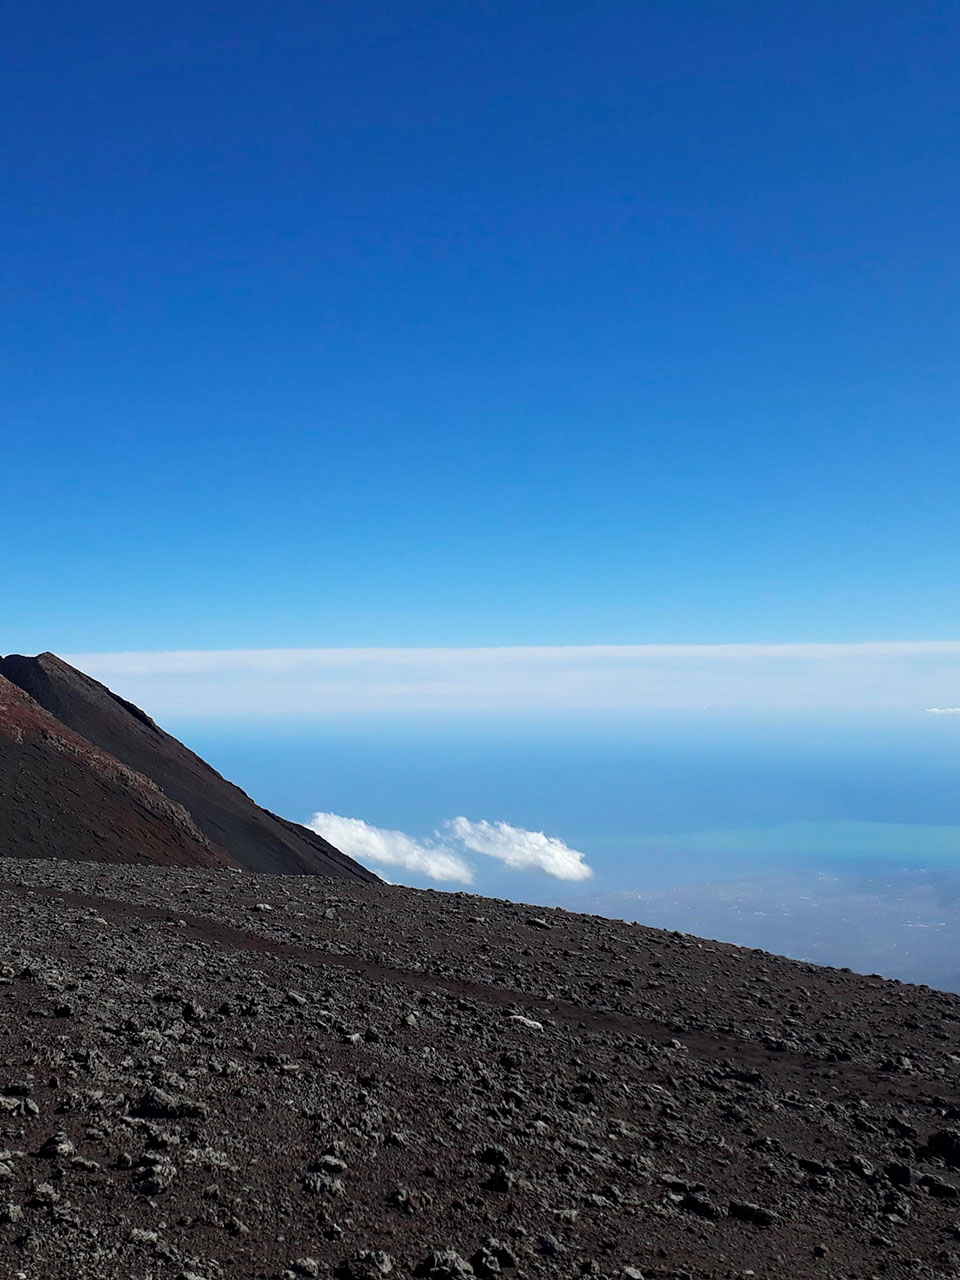 view from the top of Mount Etna towards the coast